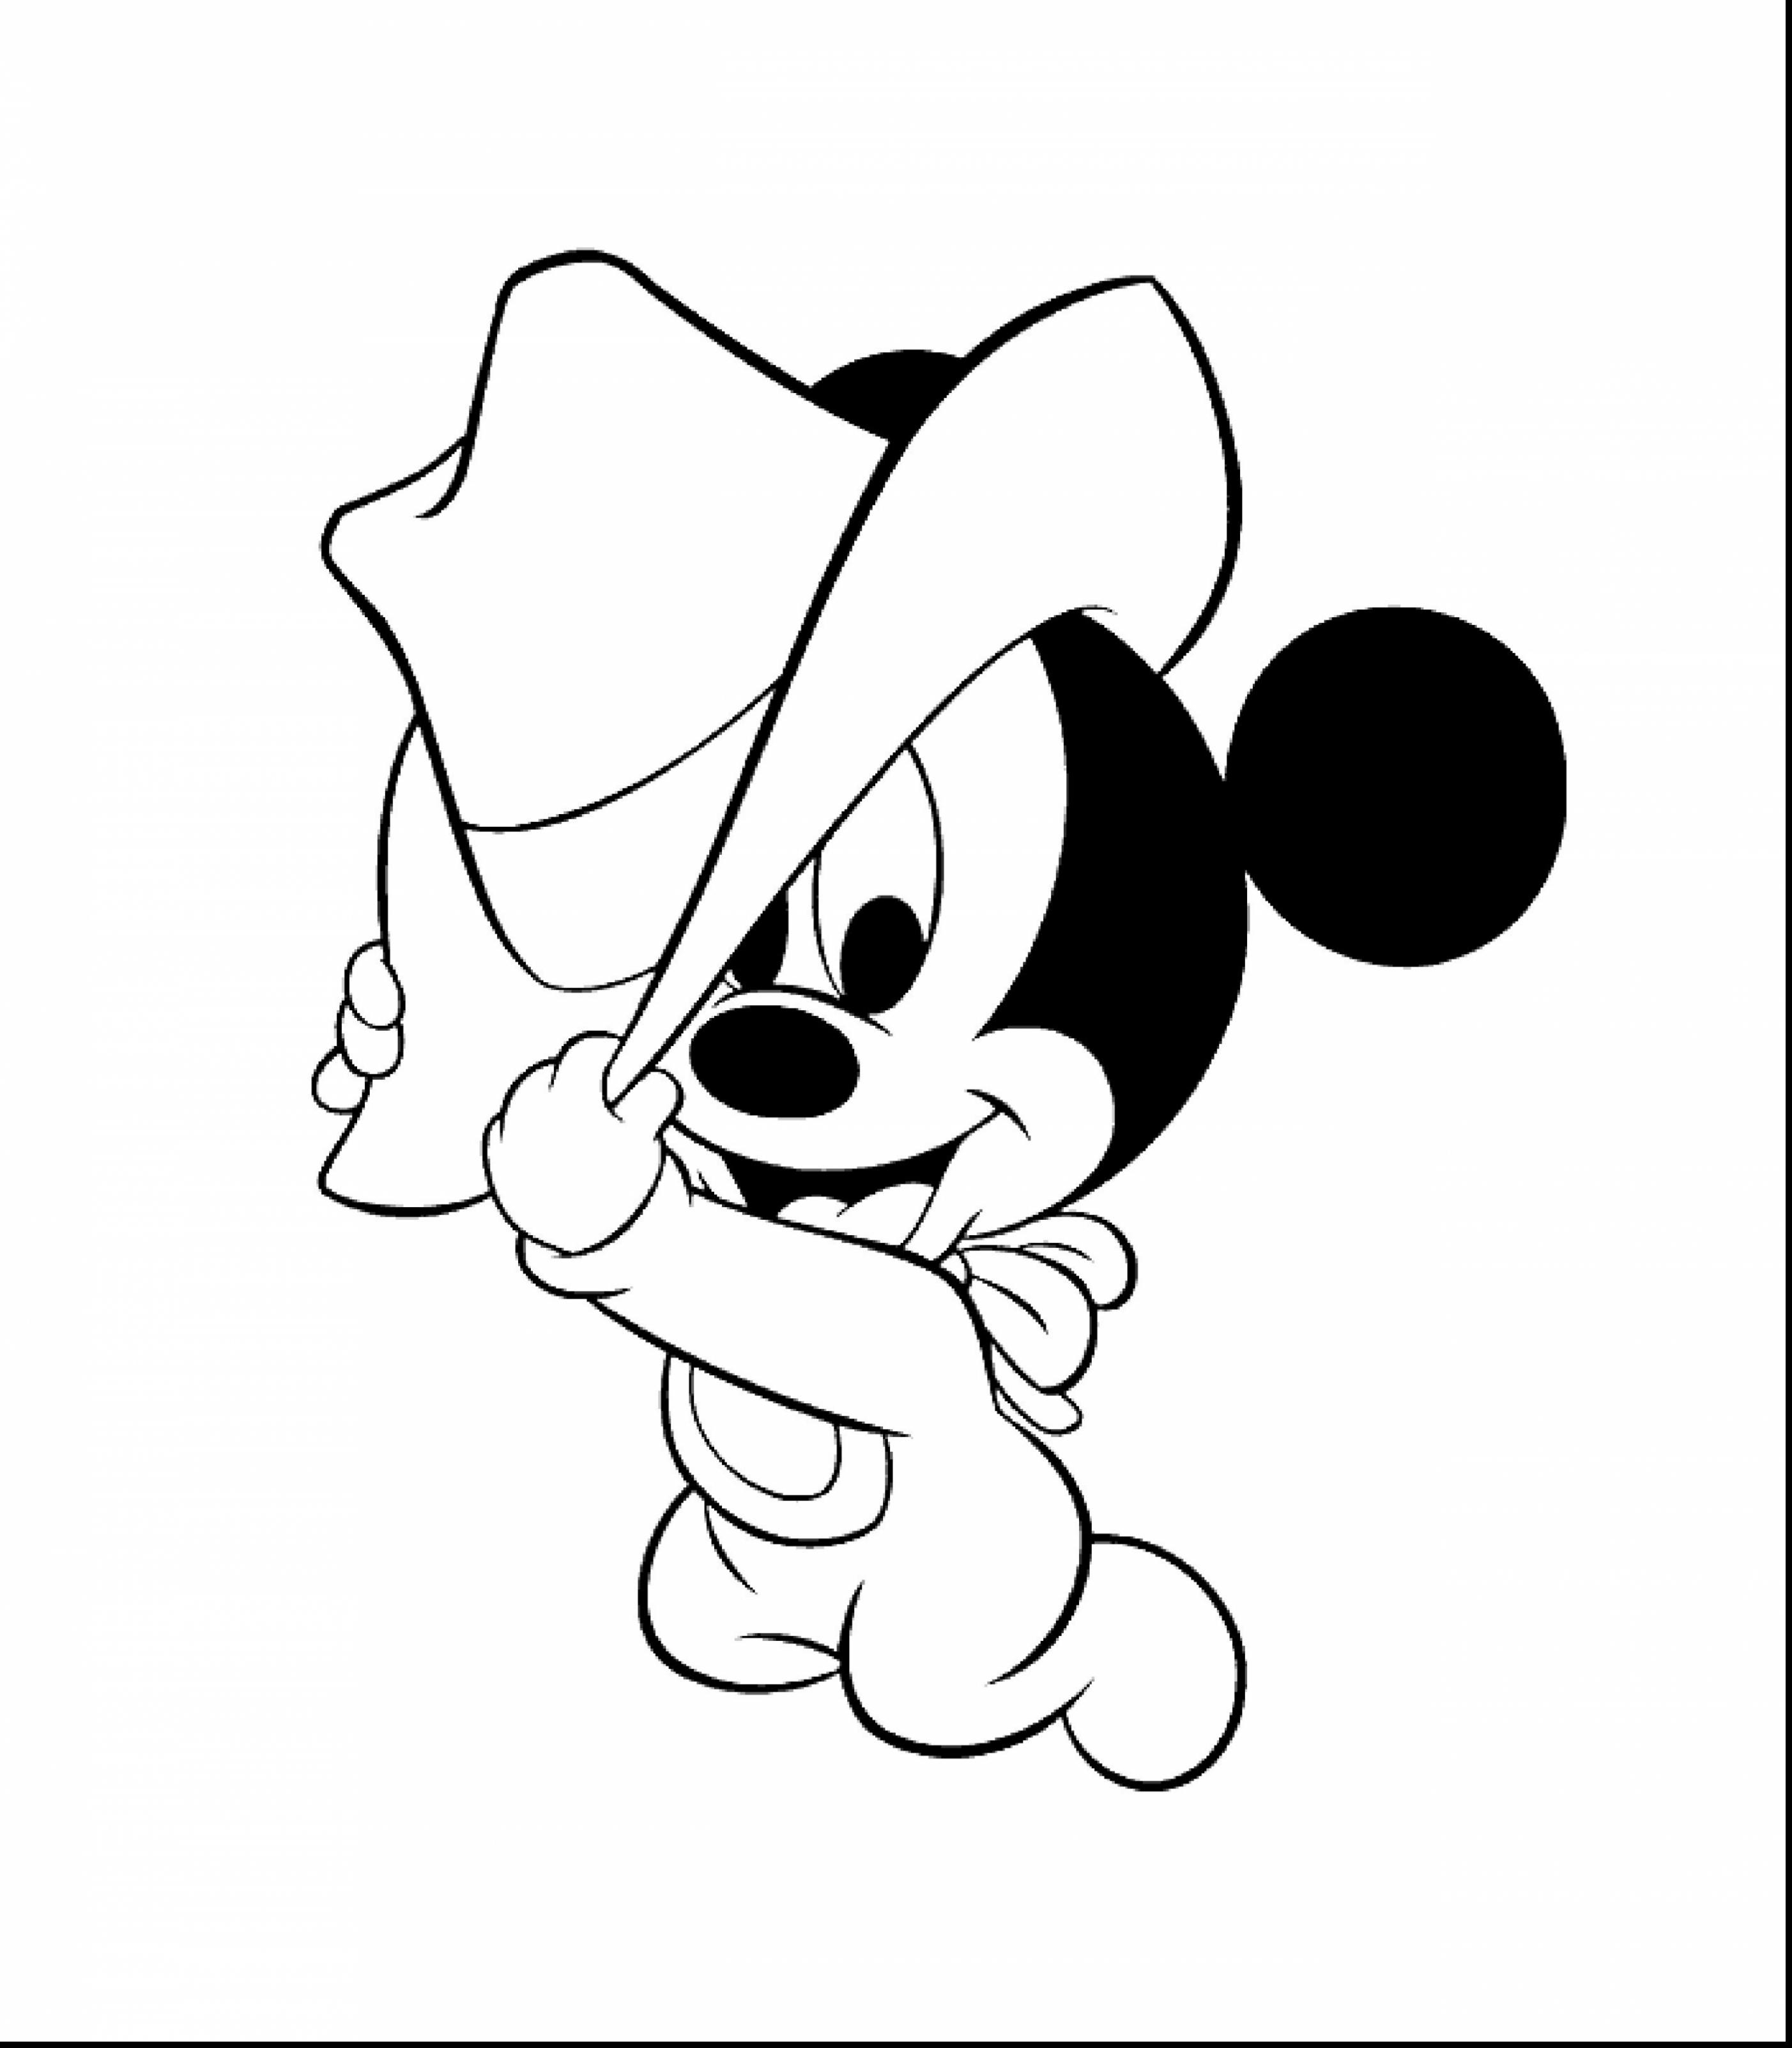 Minnie Mouse Line Drawing at GetDrawings | Free download Cute Baby Mickey Mouse Drawings